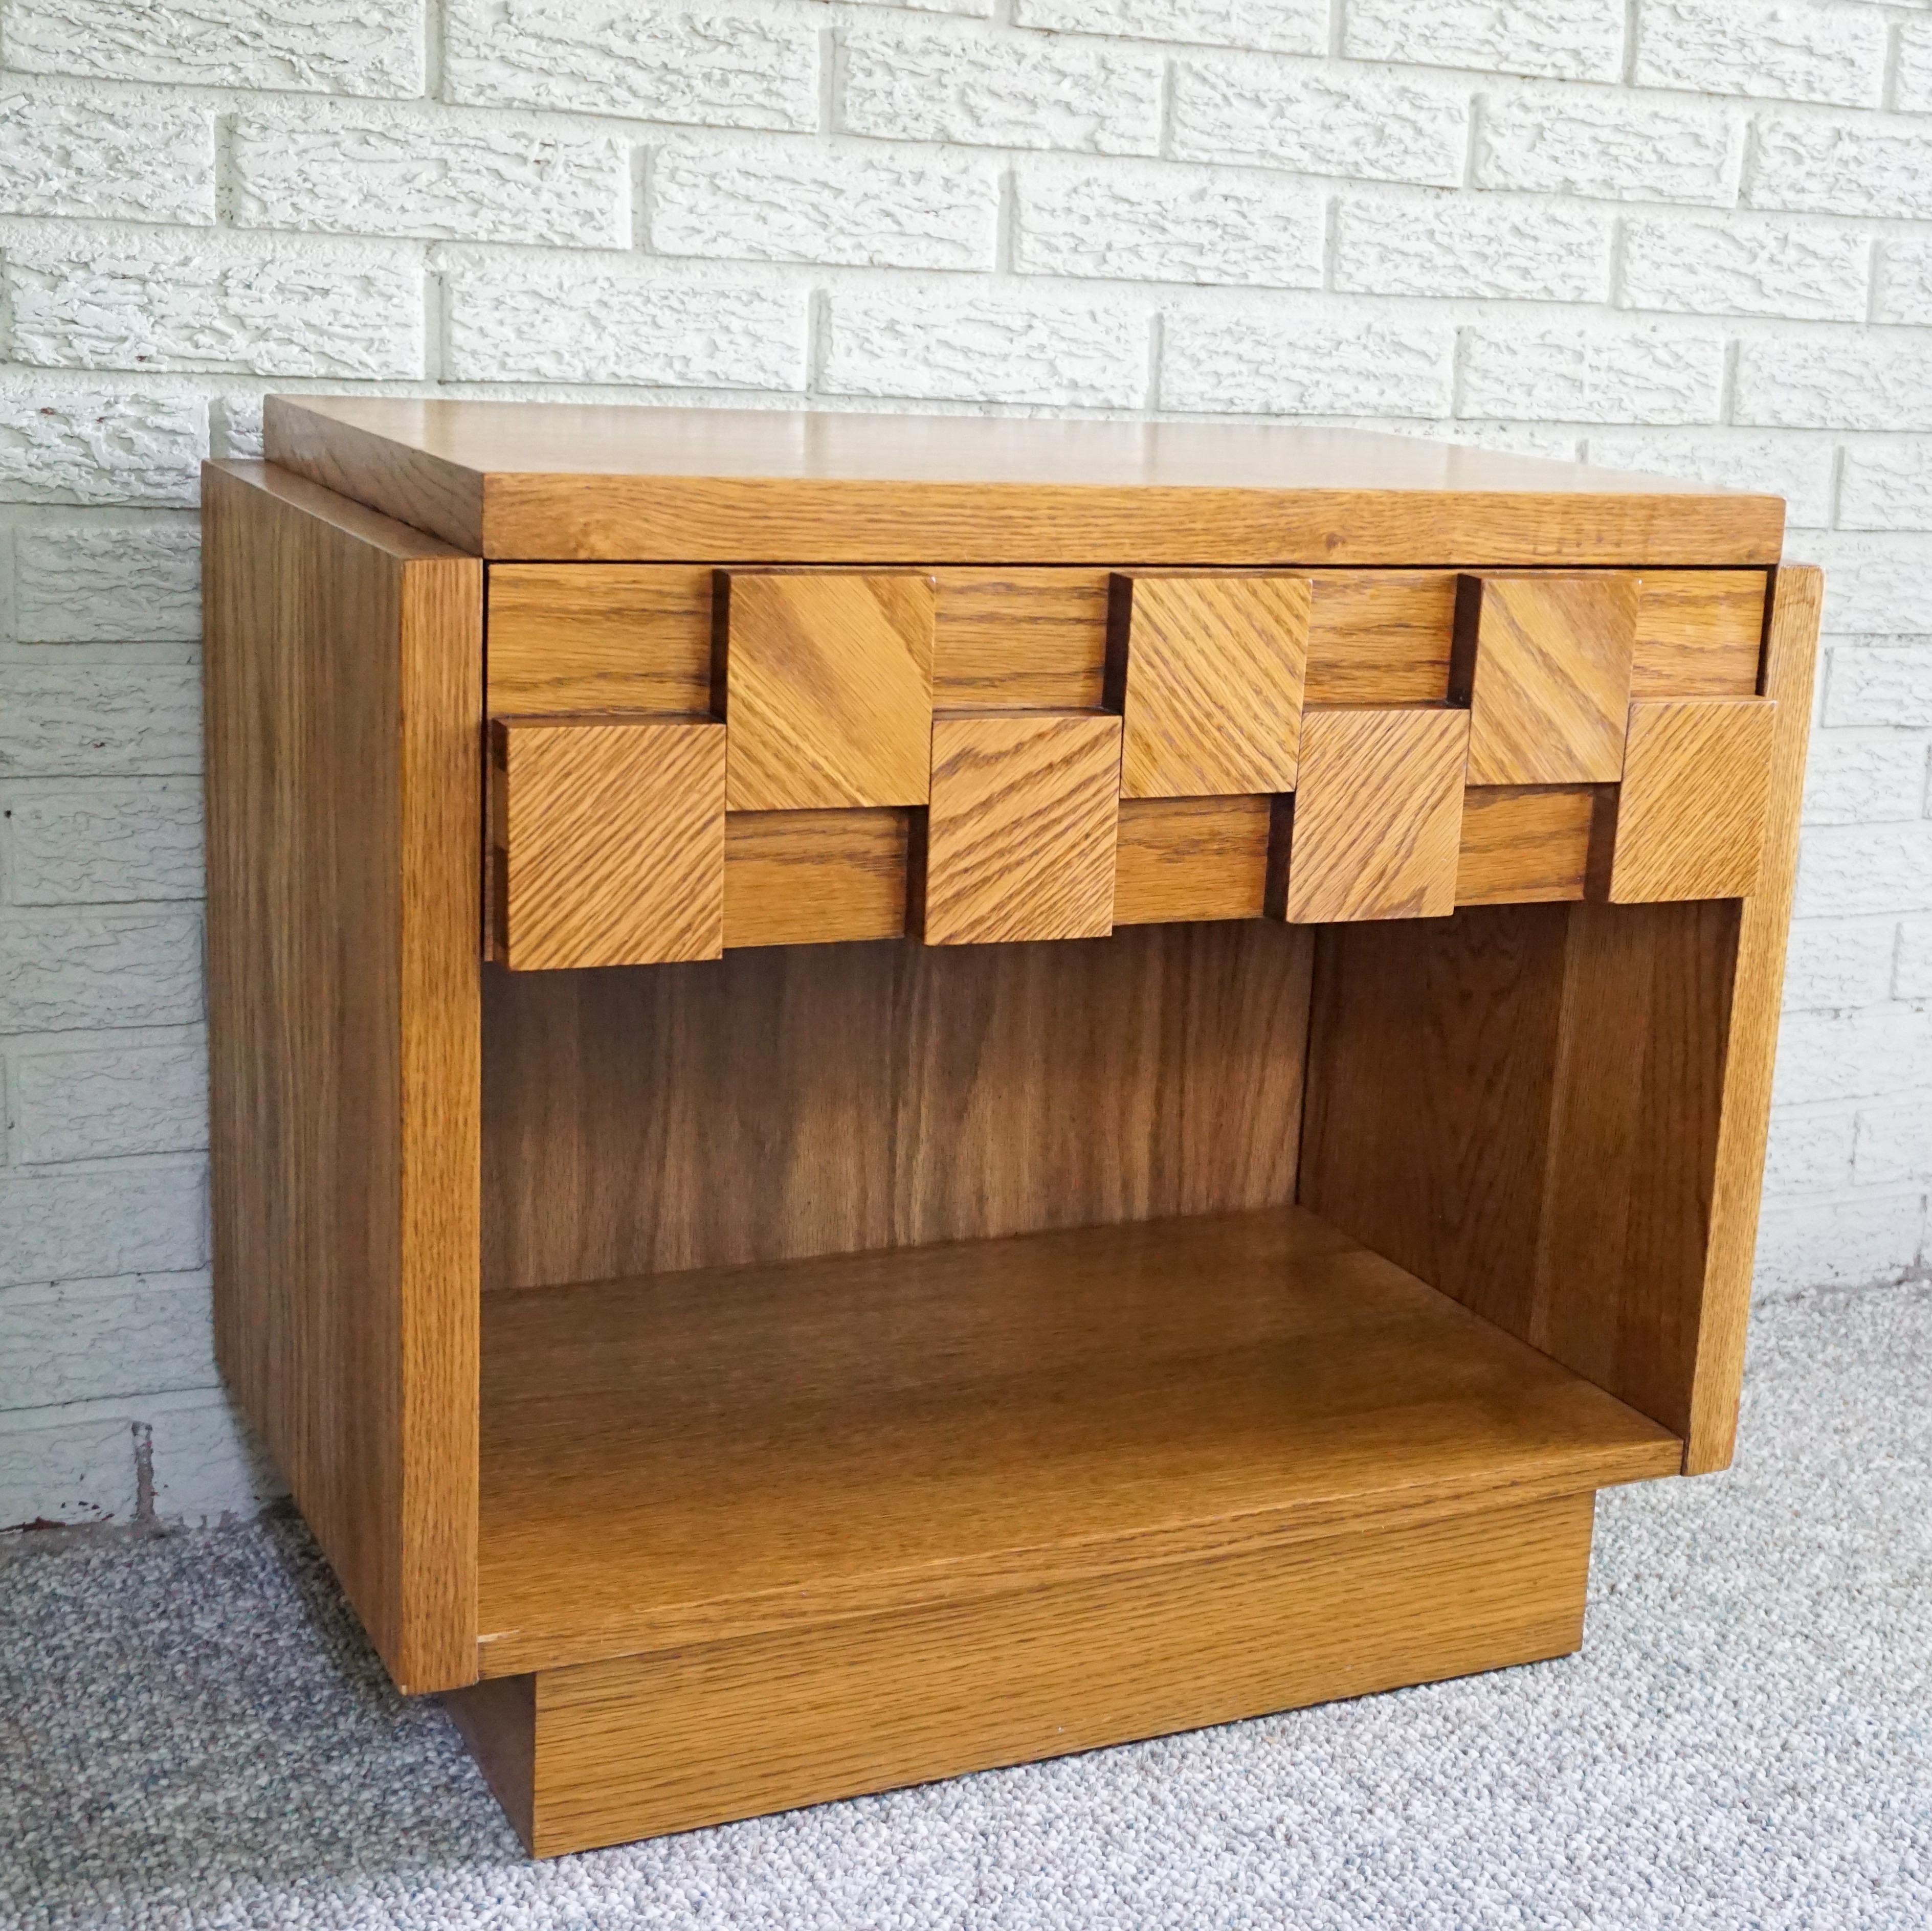 Brutalist style nightstands by Lane from their 1970s Staccato furniture line. The front of the chest is done in a mosaic sculptural pattern of oak blocks on the drawer fronts. Beneath the drawer is open storage space. It retains the original deep